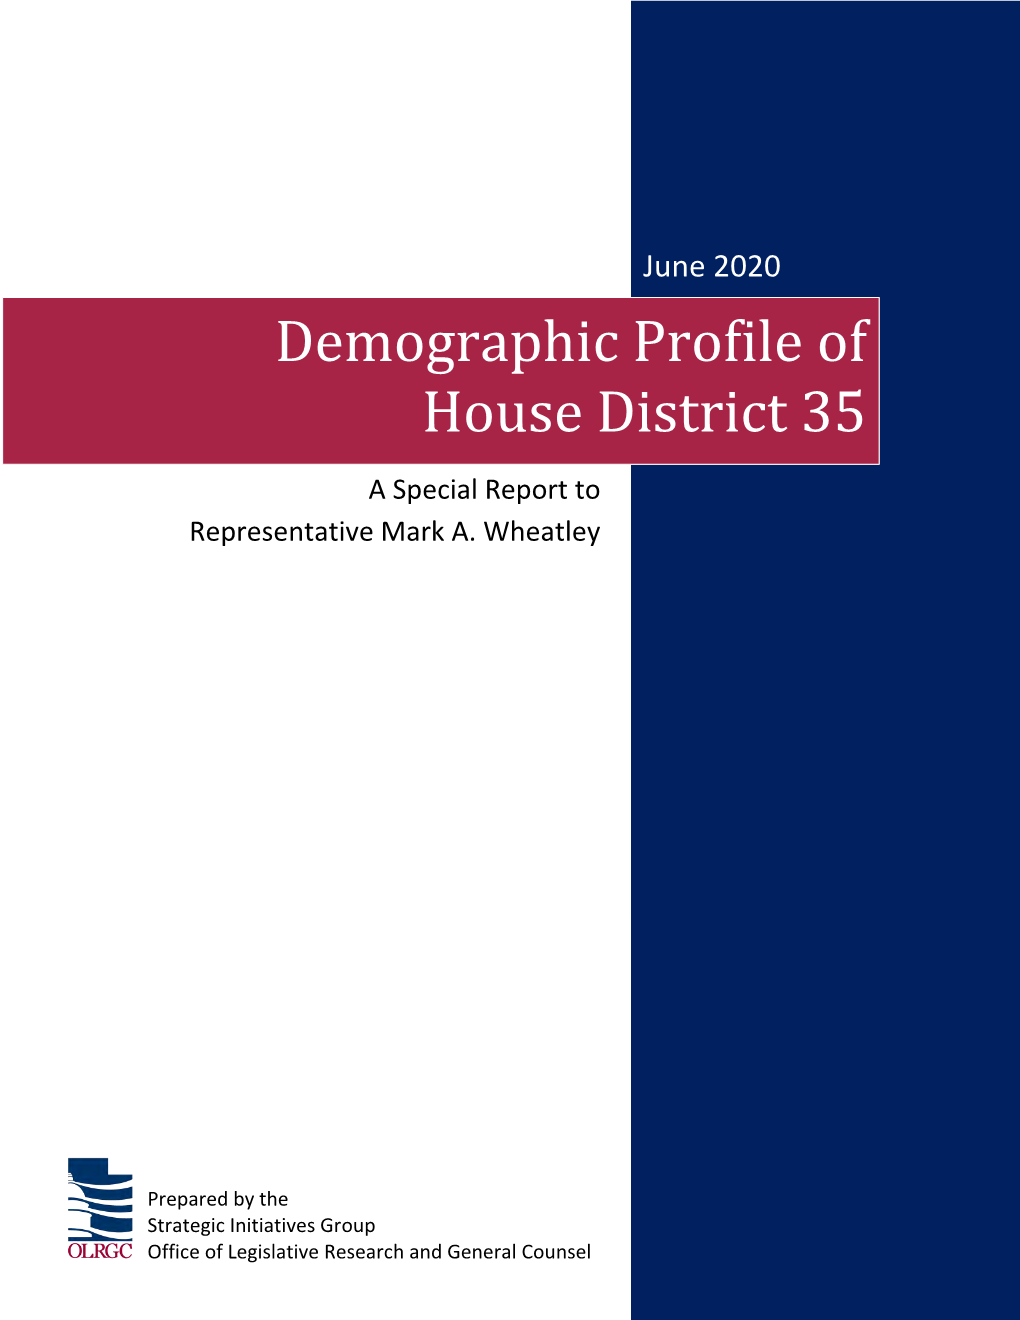 Demographic Profile of House District 35